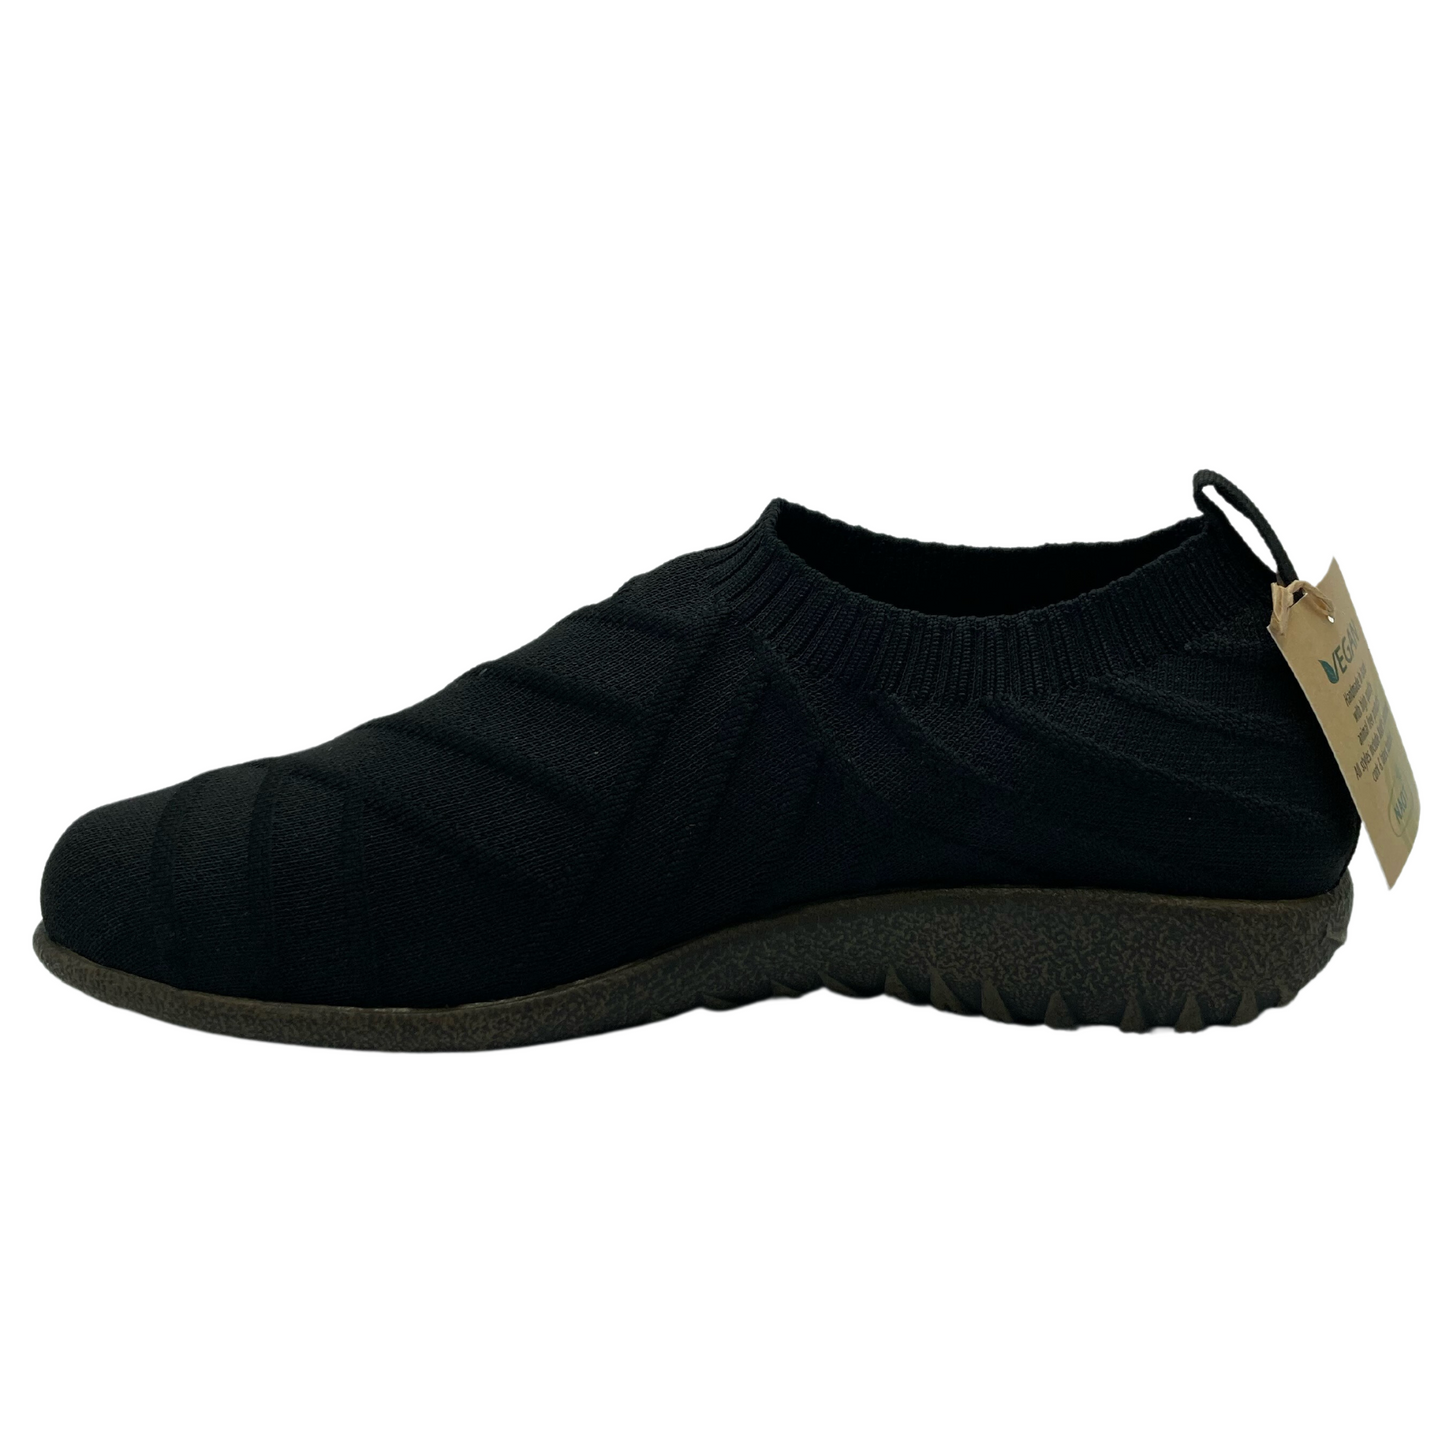 Left facing view of black, knit slip on sneaker with polyurethane sole